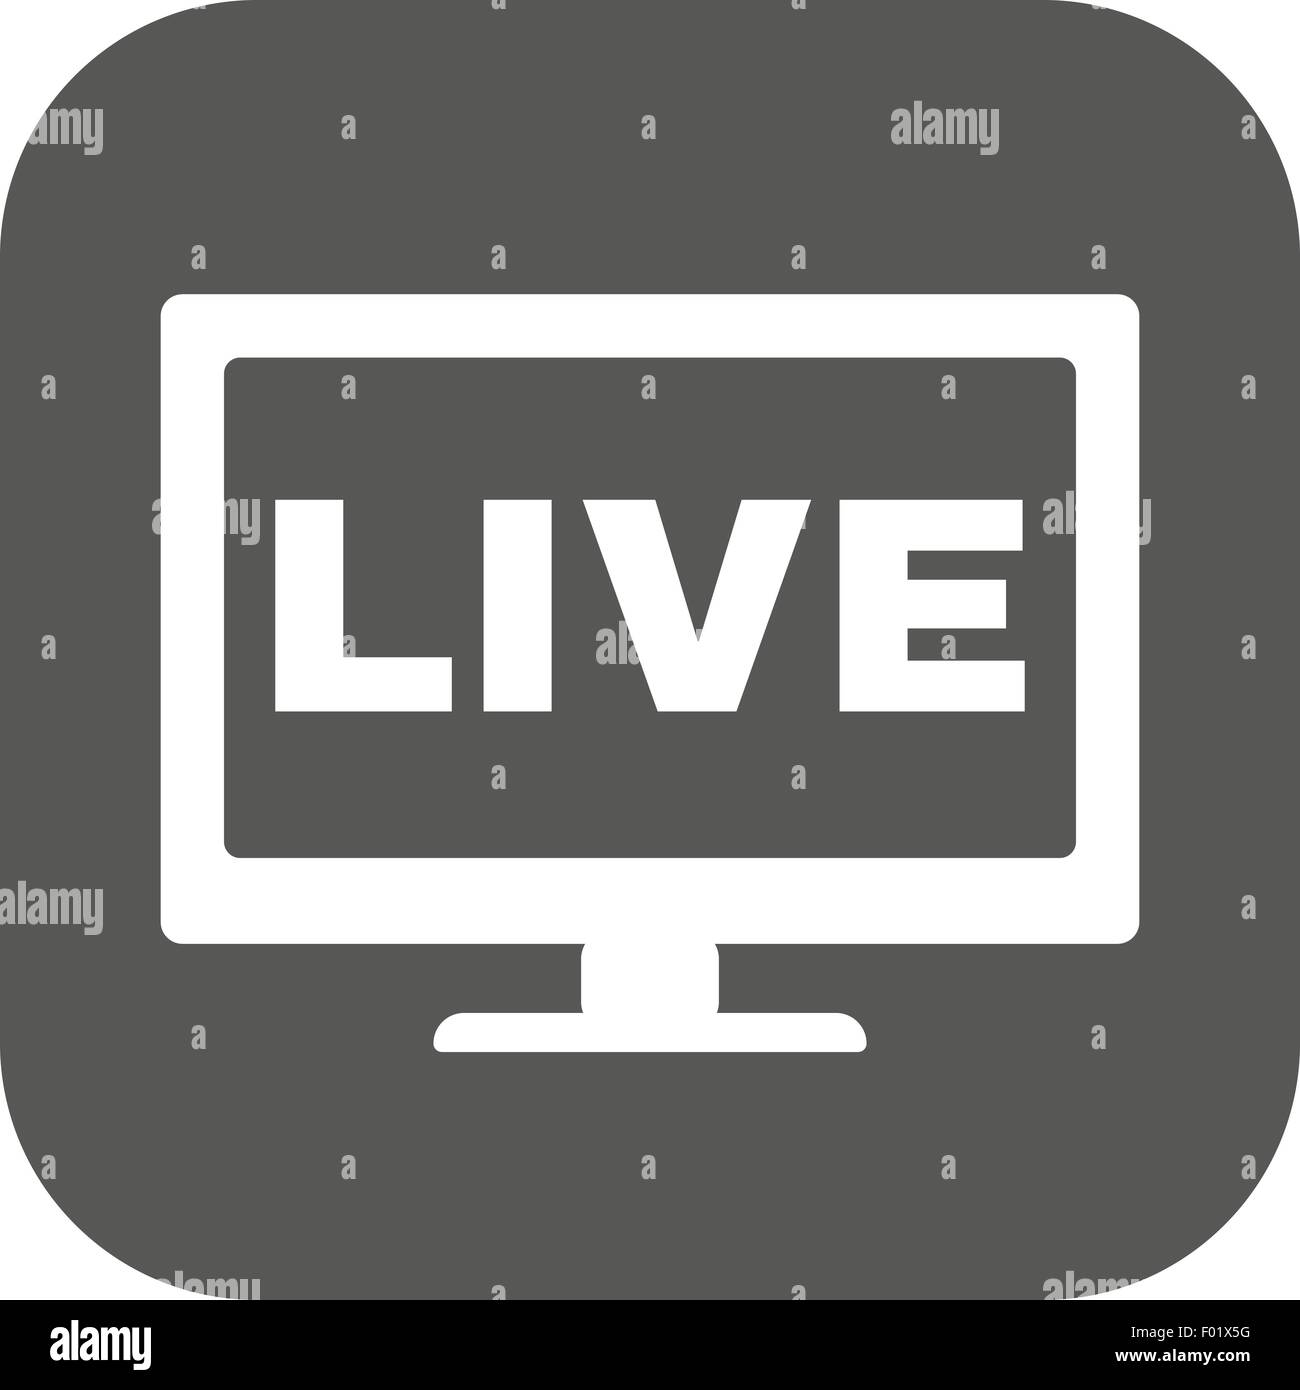 The live tv icon. Broadcasting and broadcast symbol. Flat Stock Vector